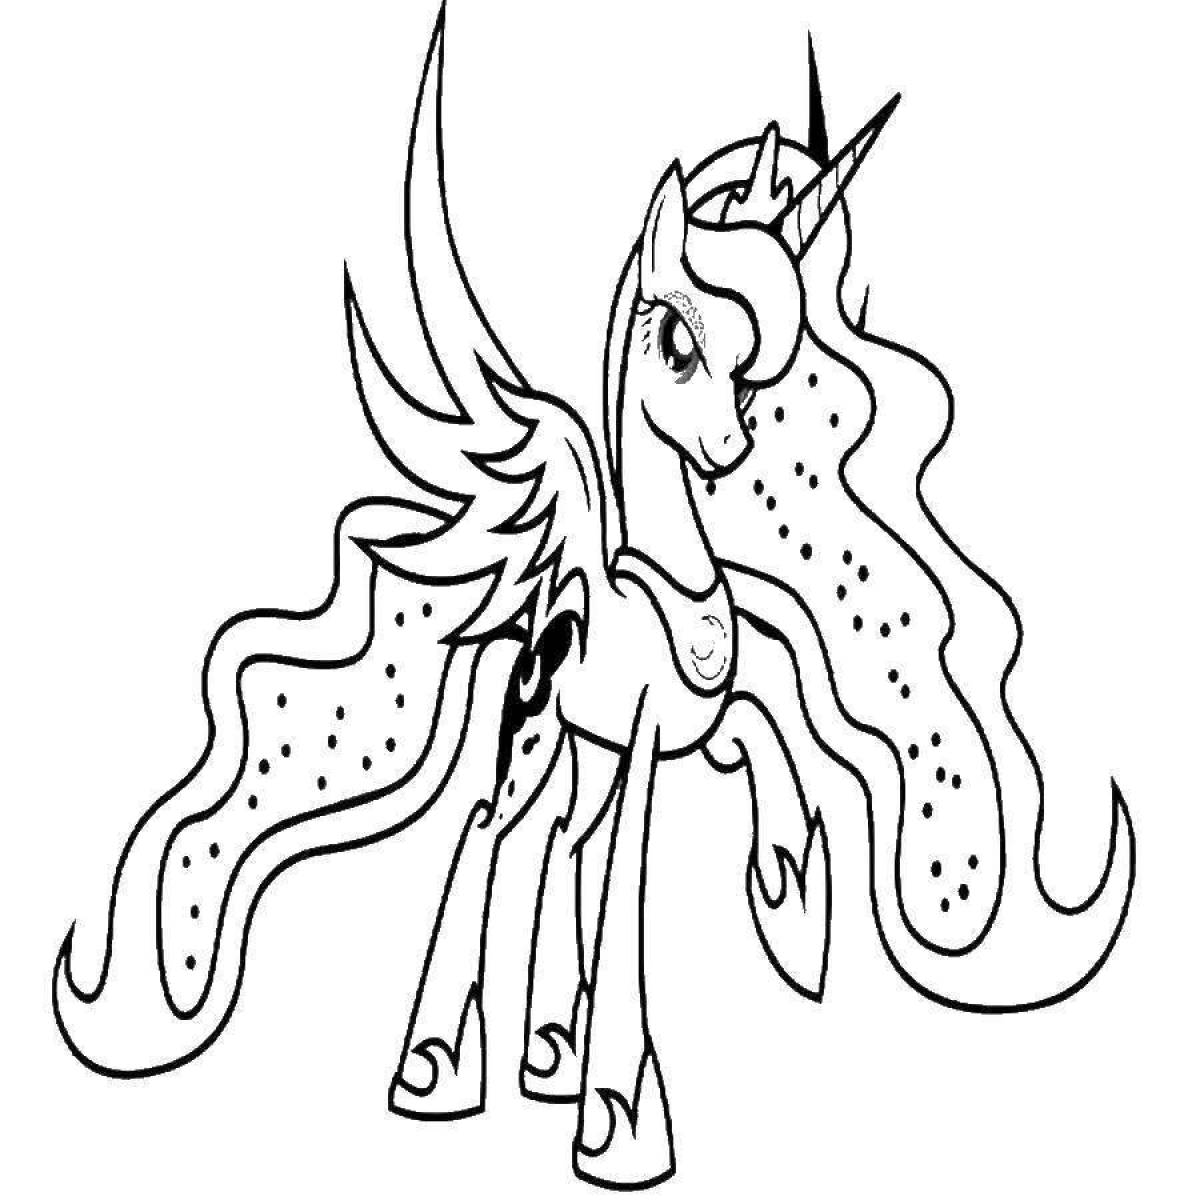 Awesome unicorn pony coloring book